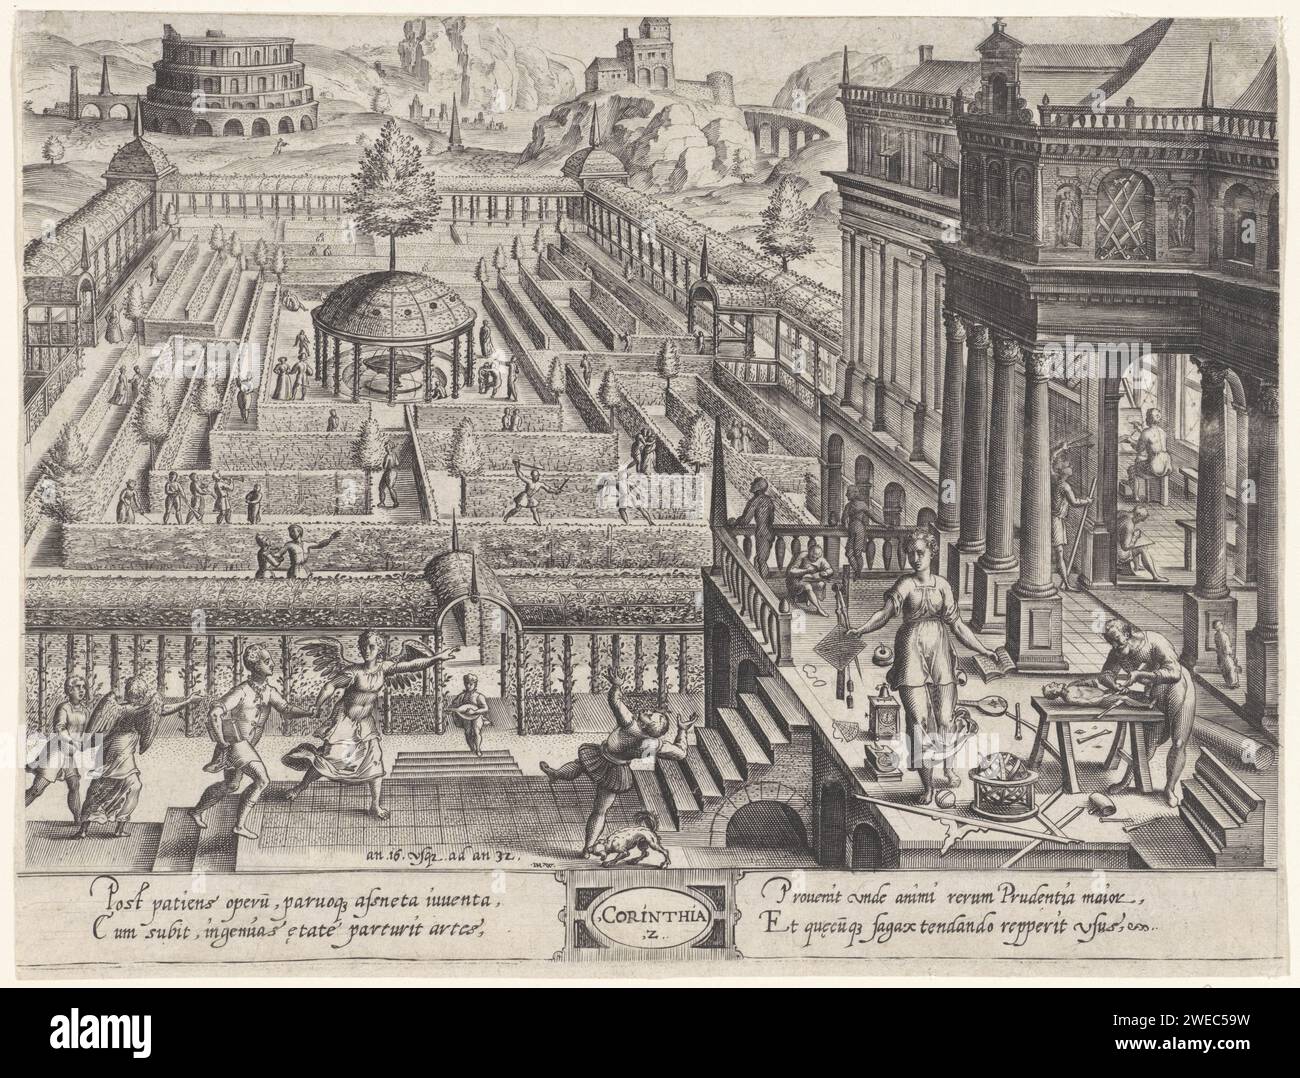 From 16 years old to the age of 32: the Corinthian Order, Johannes Wierix, after Hans Vredeman de Vries, 1577 print Walled inner garden with a maze, fountain and pergolas. Young people enjoy themselves in the maze. In the foreground, Engelen lead young men to a house where various arts are practiced. In the margin a four -line caption, in two columns, in Latin. Antwerp paper engraving Corinthian order  architecture. adult man. labyrinth, maze  garden. painting, drawing and the graphic arts Stock Photo